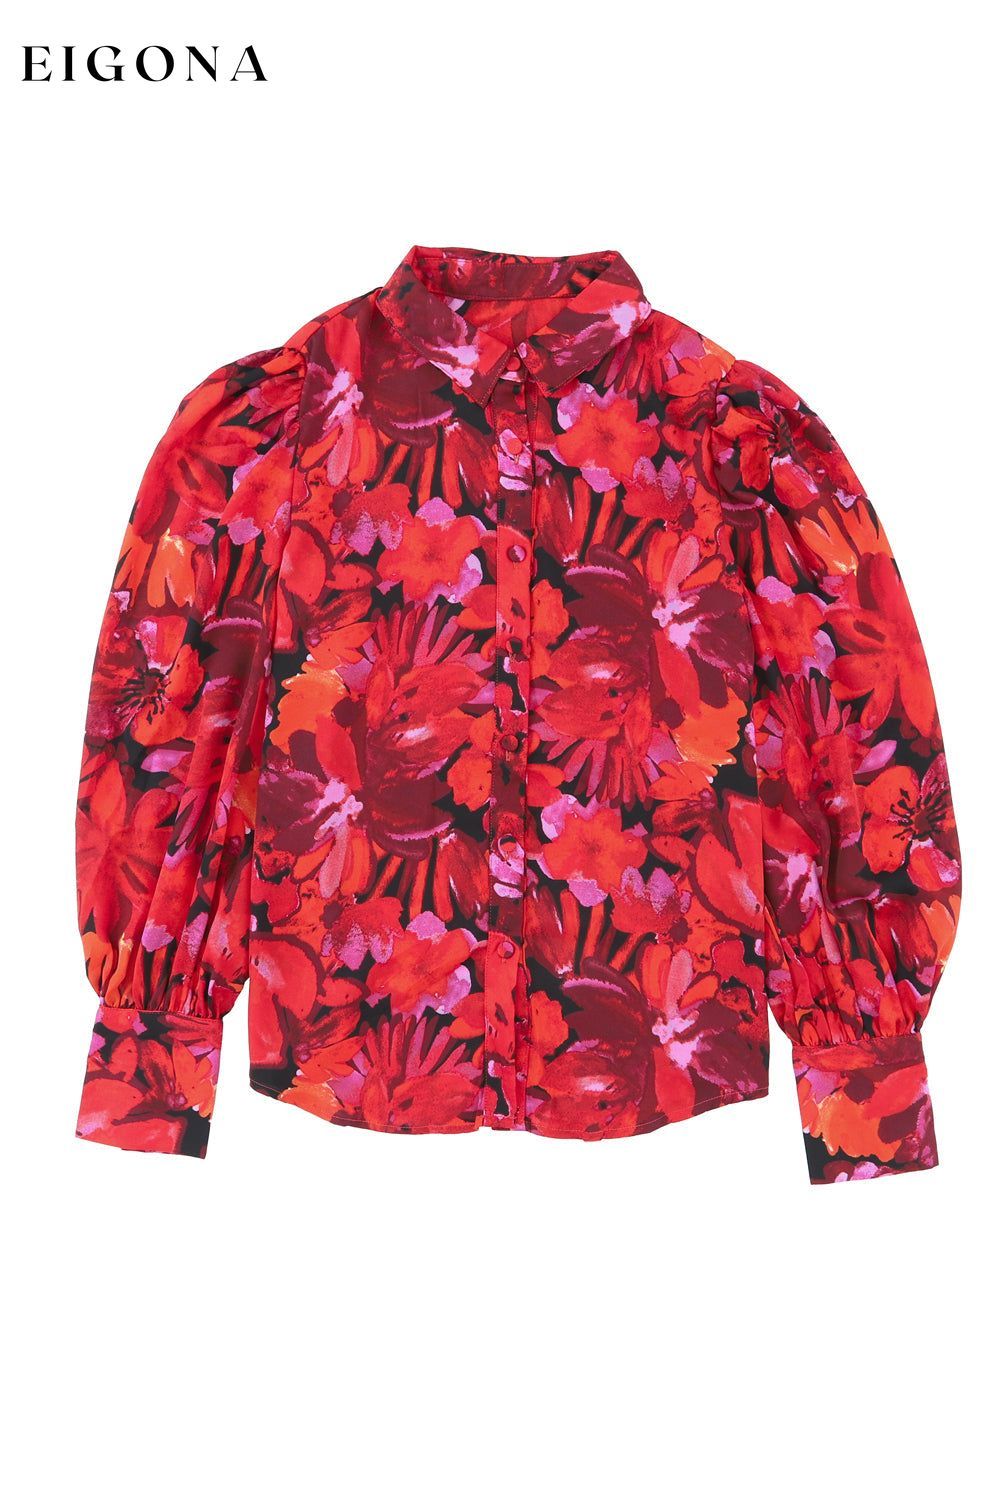 Red Floral Print Lantern Sleeve Shirt All In Stock clothes clothing long sleeve shirts long sleeve top Occasion Daily Print Floral Season Spring shirt shirts Style Elegant top tops